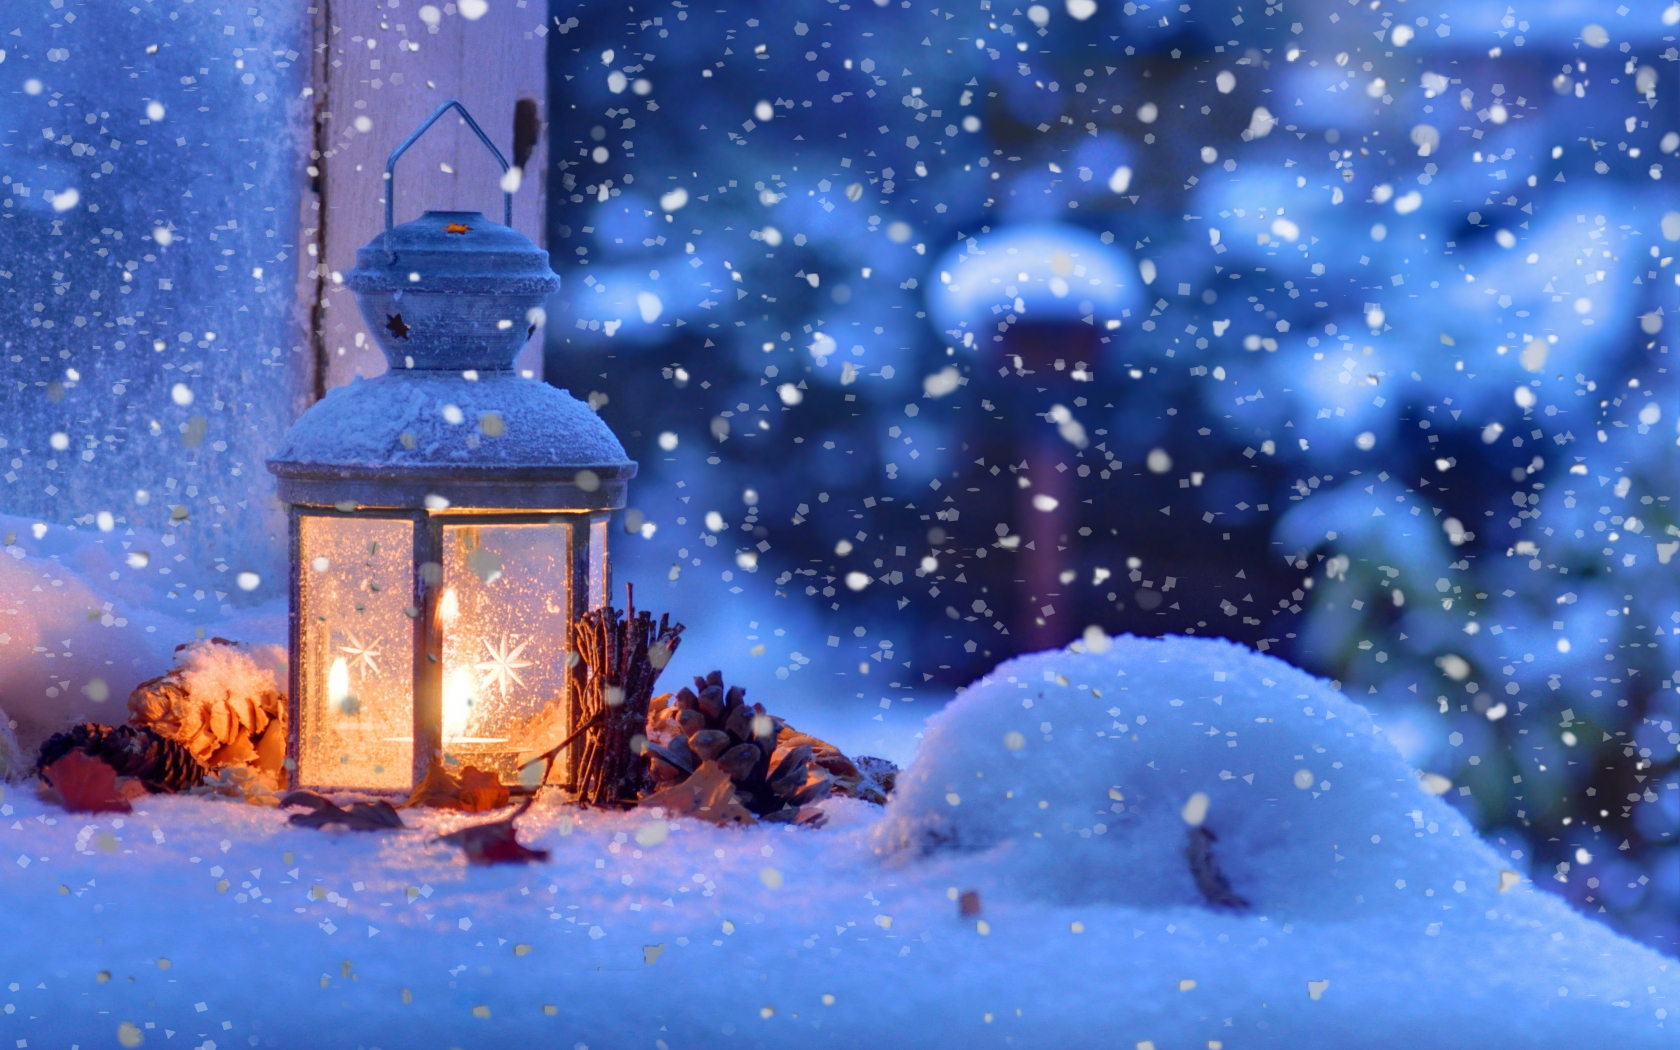 Free download Winter Snow Related Keywords amp Suggestions Winter Snow [4287x2847] for your Desktop, Mobile & Tablet. Explore Winter Christmas Desktop Background. Winter Wallpaper, Free Desktop Wallpaper Winter Holiday